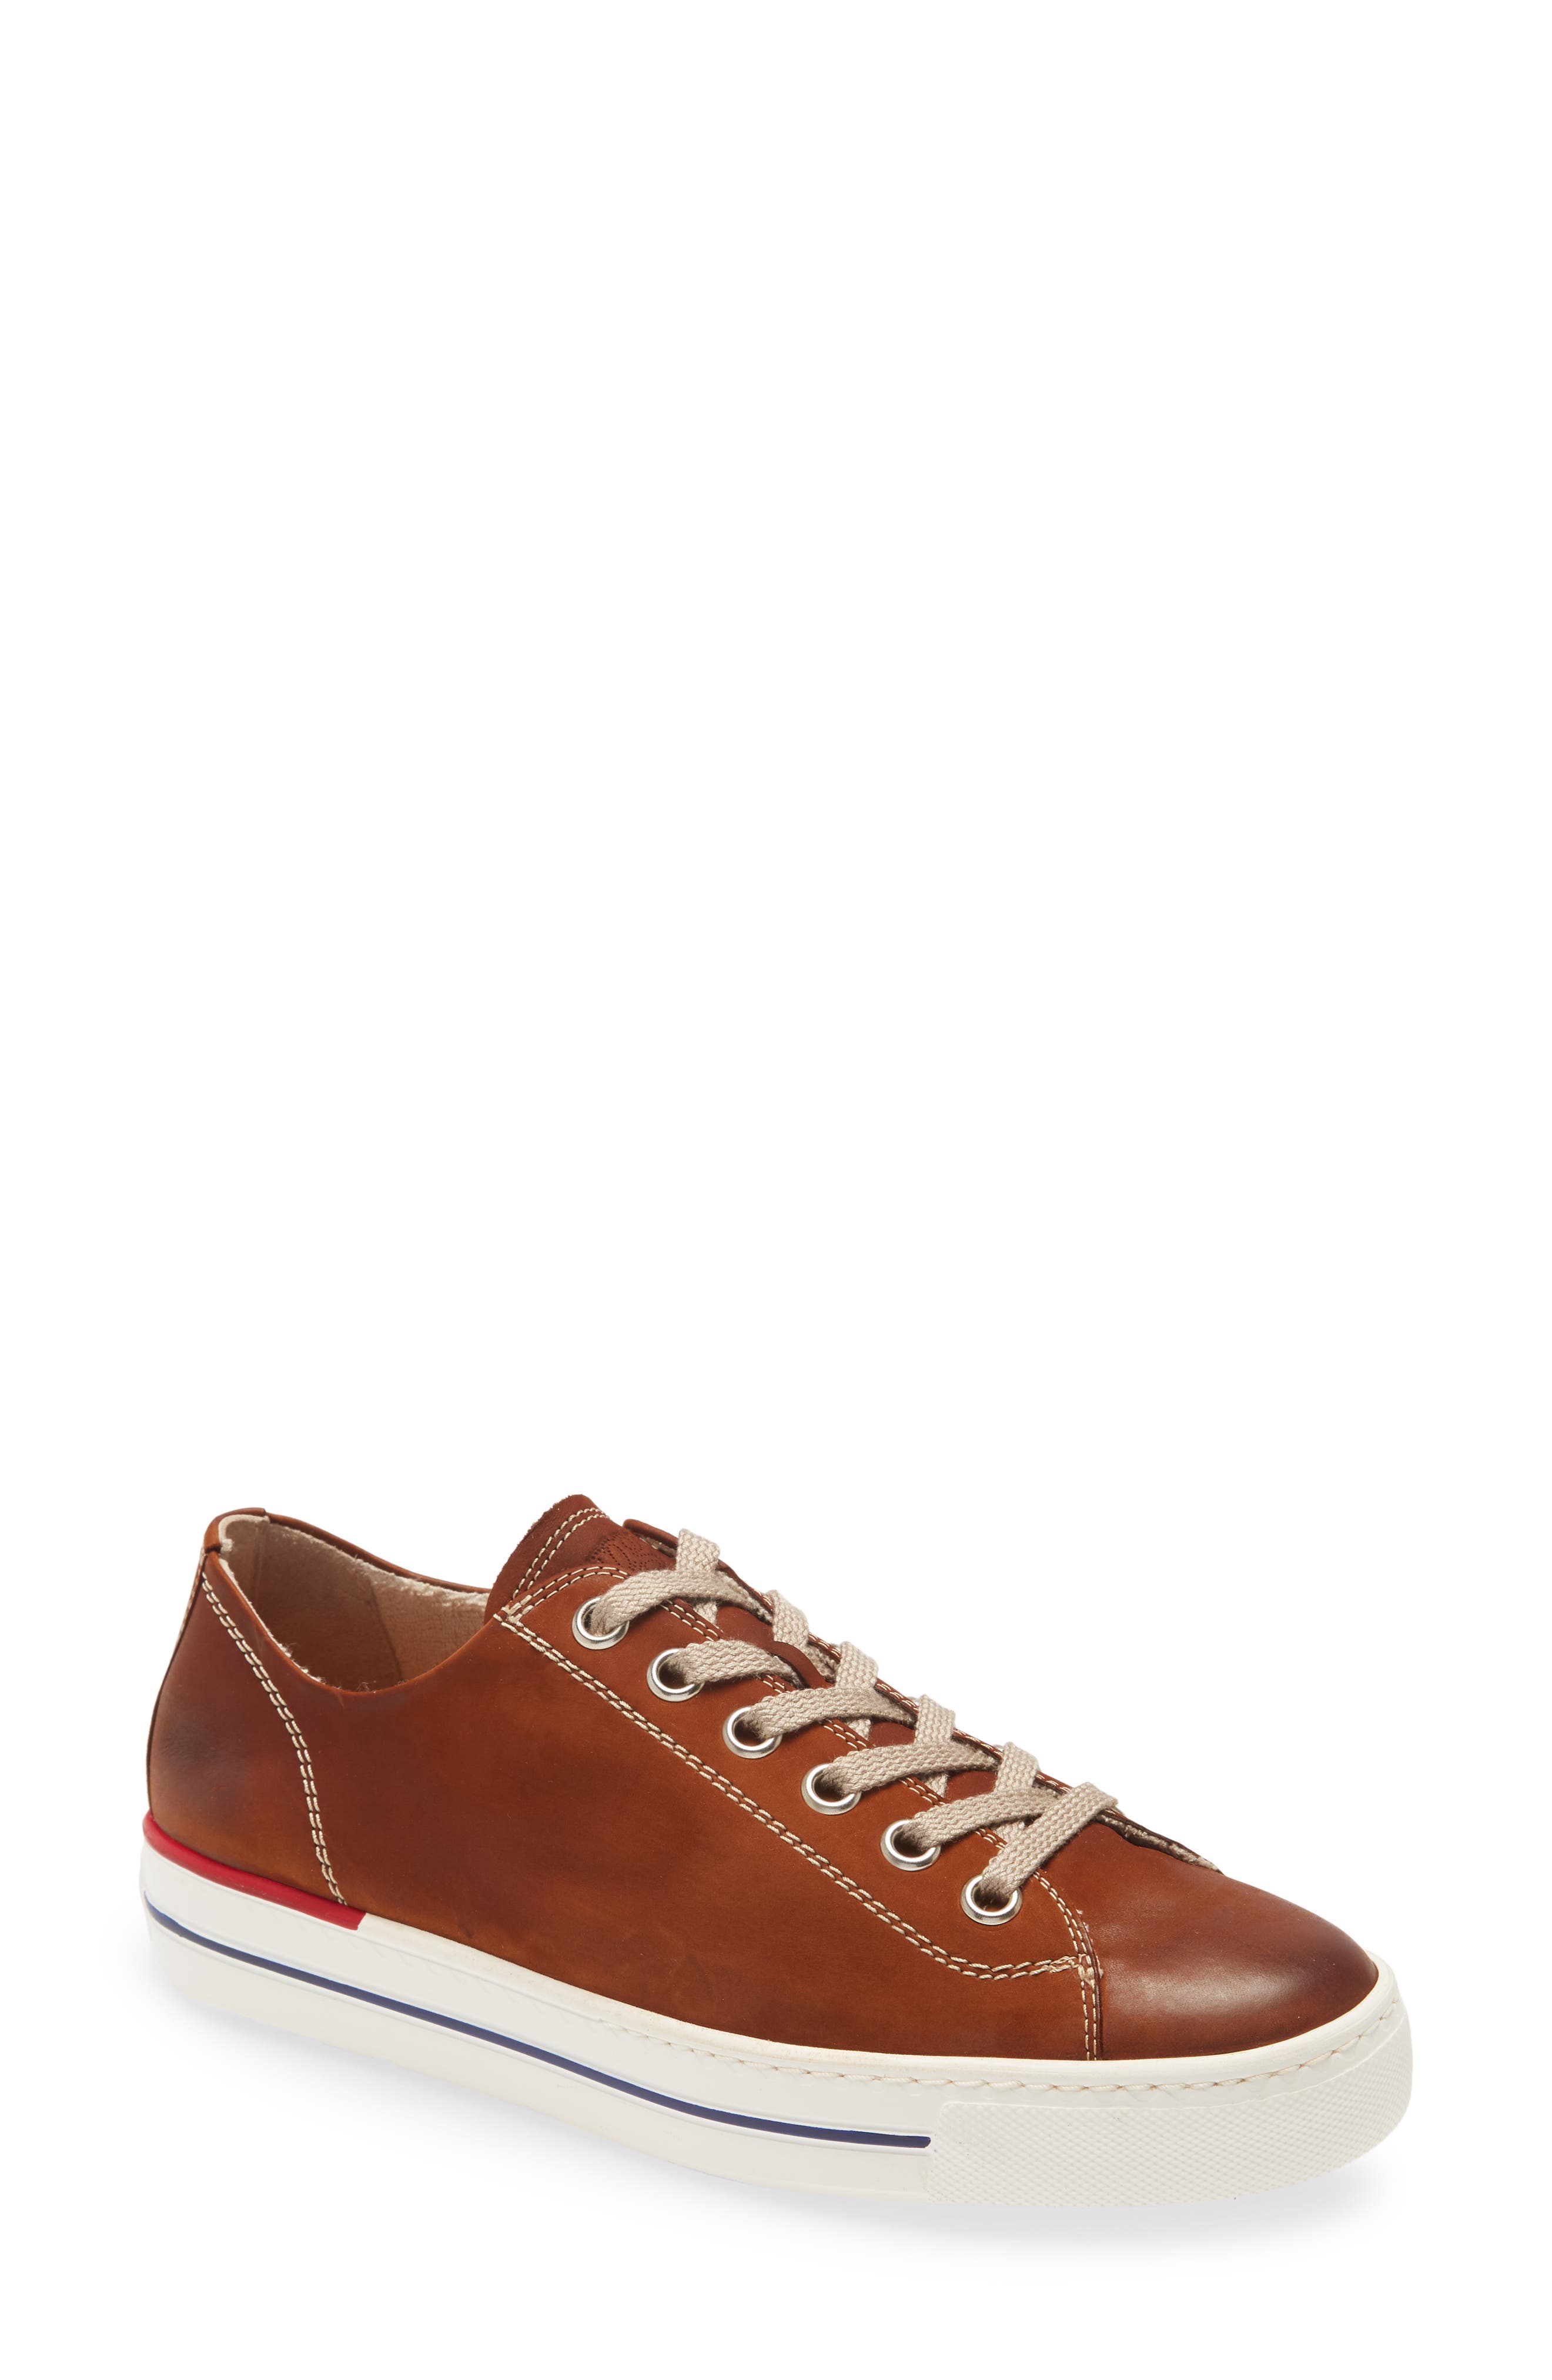 tan leather sneakers womens